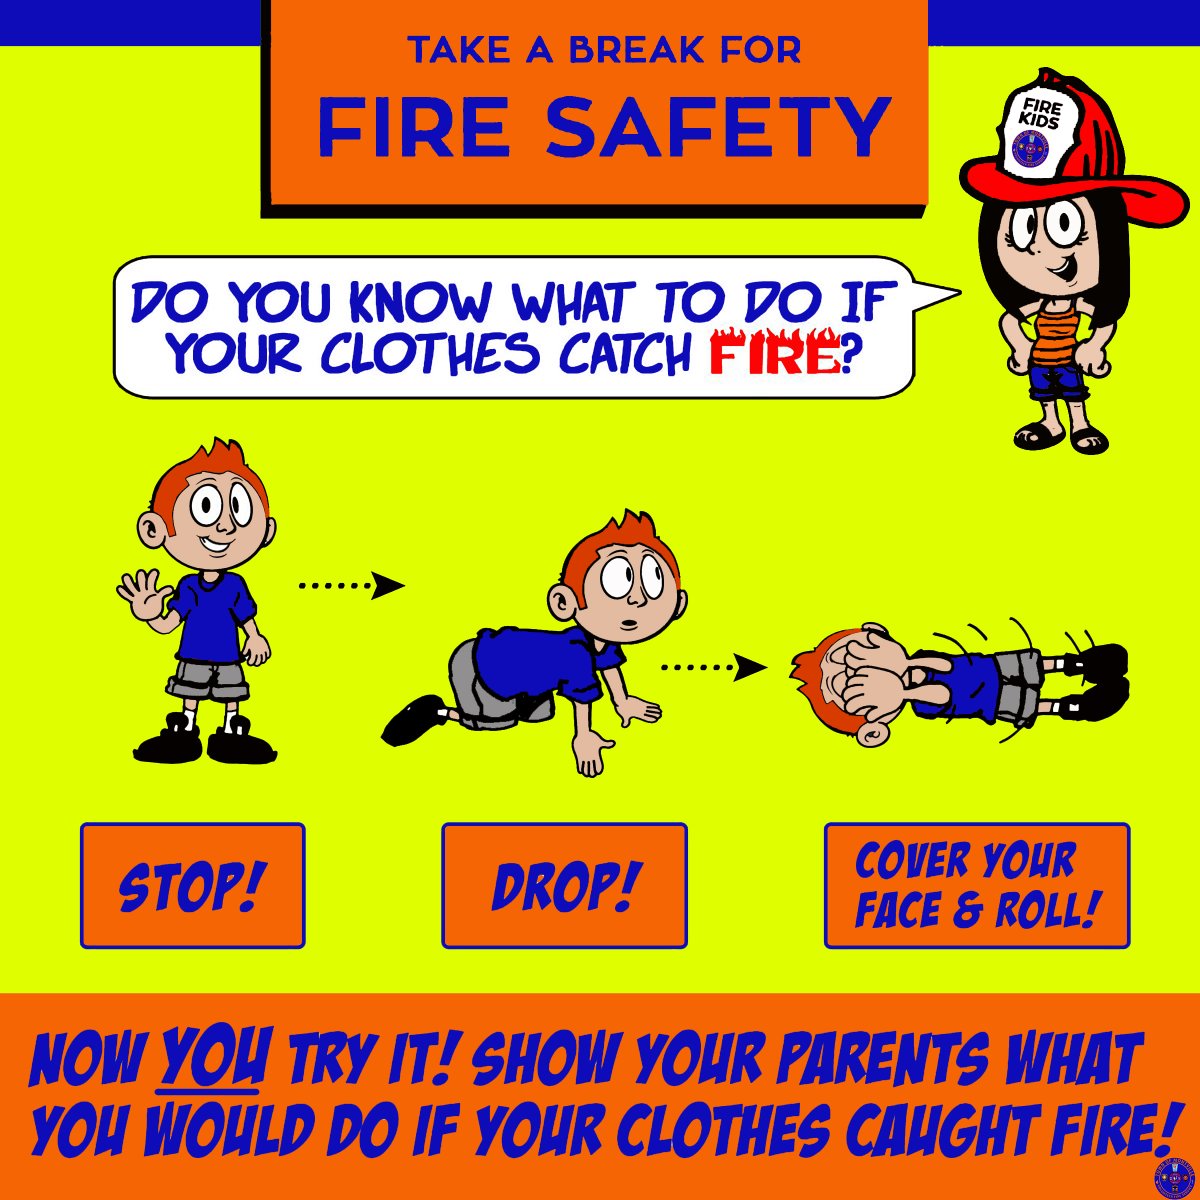 Stop!
Drop!
Cover Your Face and Roll!

#MTVCT #Montville #MontvilleCT #CT #Connecticut #FireSafety #FamilySafety #KidsSafety